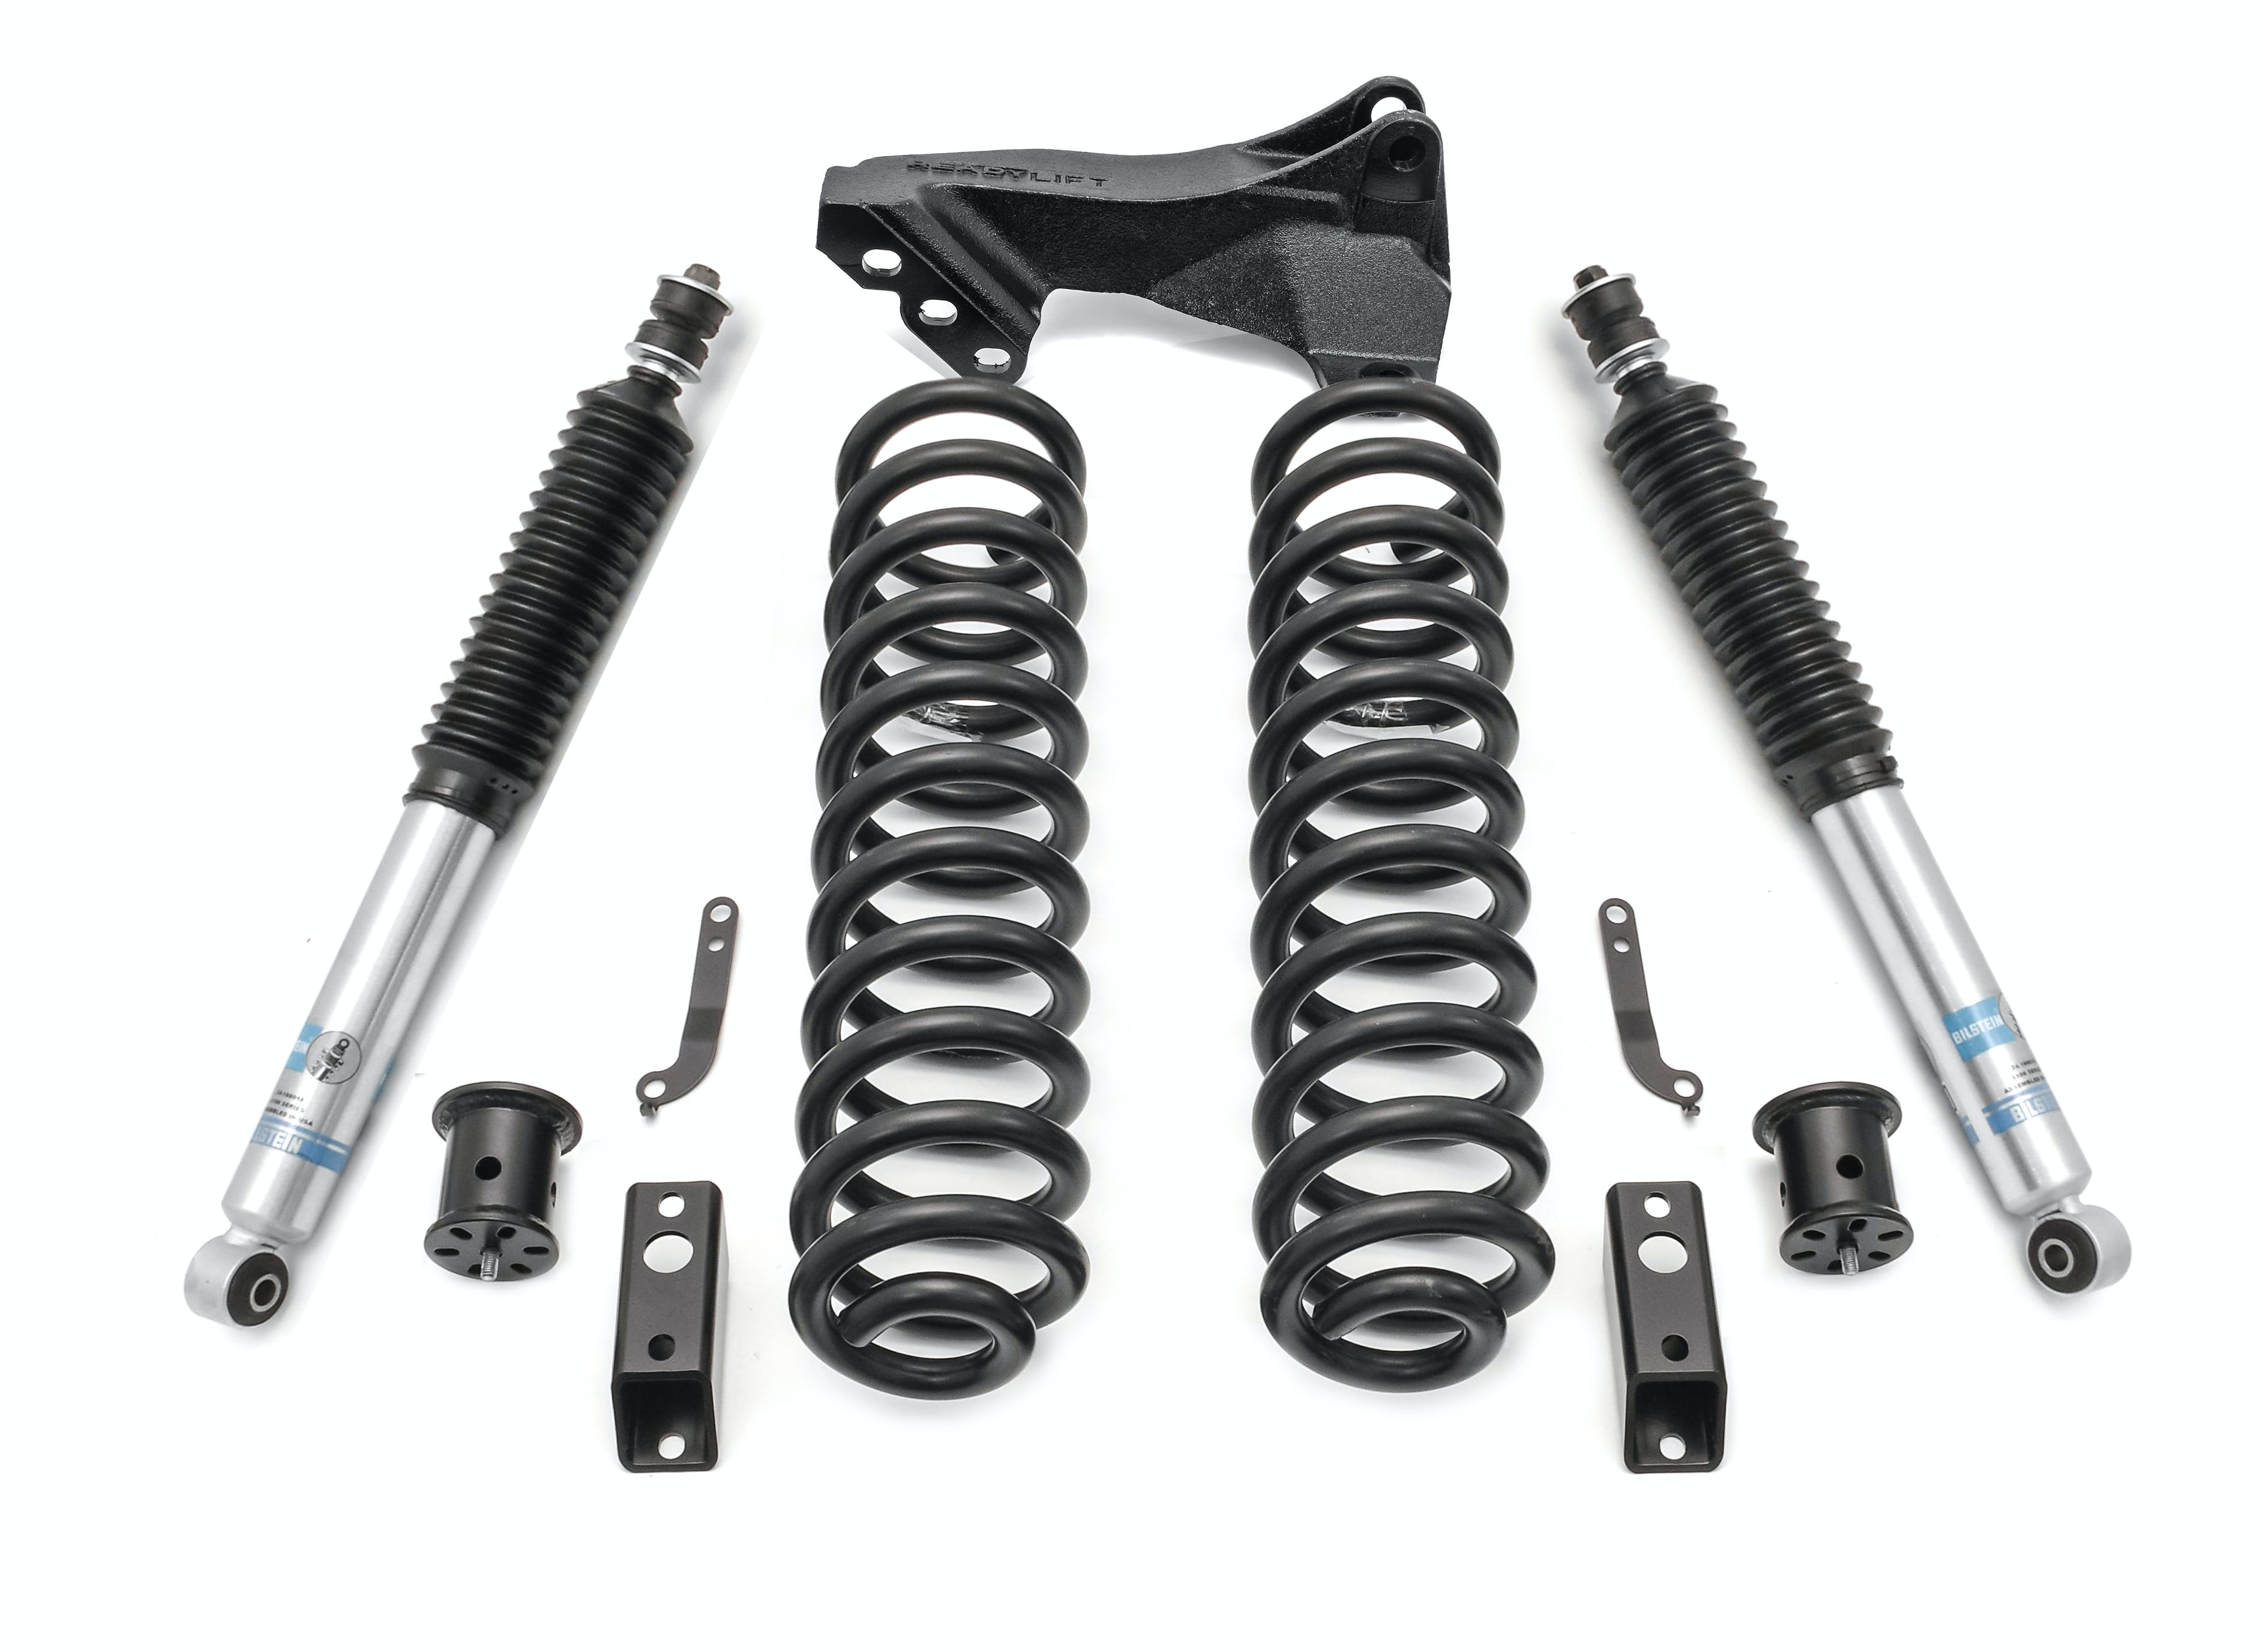 ReadyLIFT 46-2723 2.5" Coil Spring Front Lift Kit-Bilstein Front Shocks and Front Track Bar Bracket